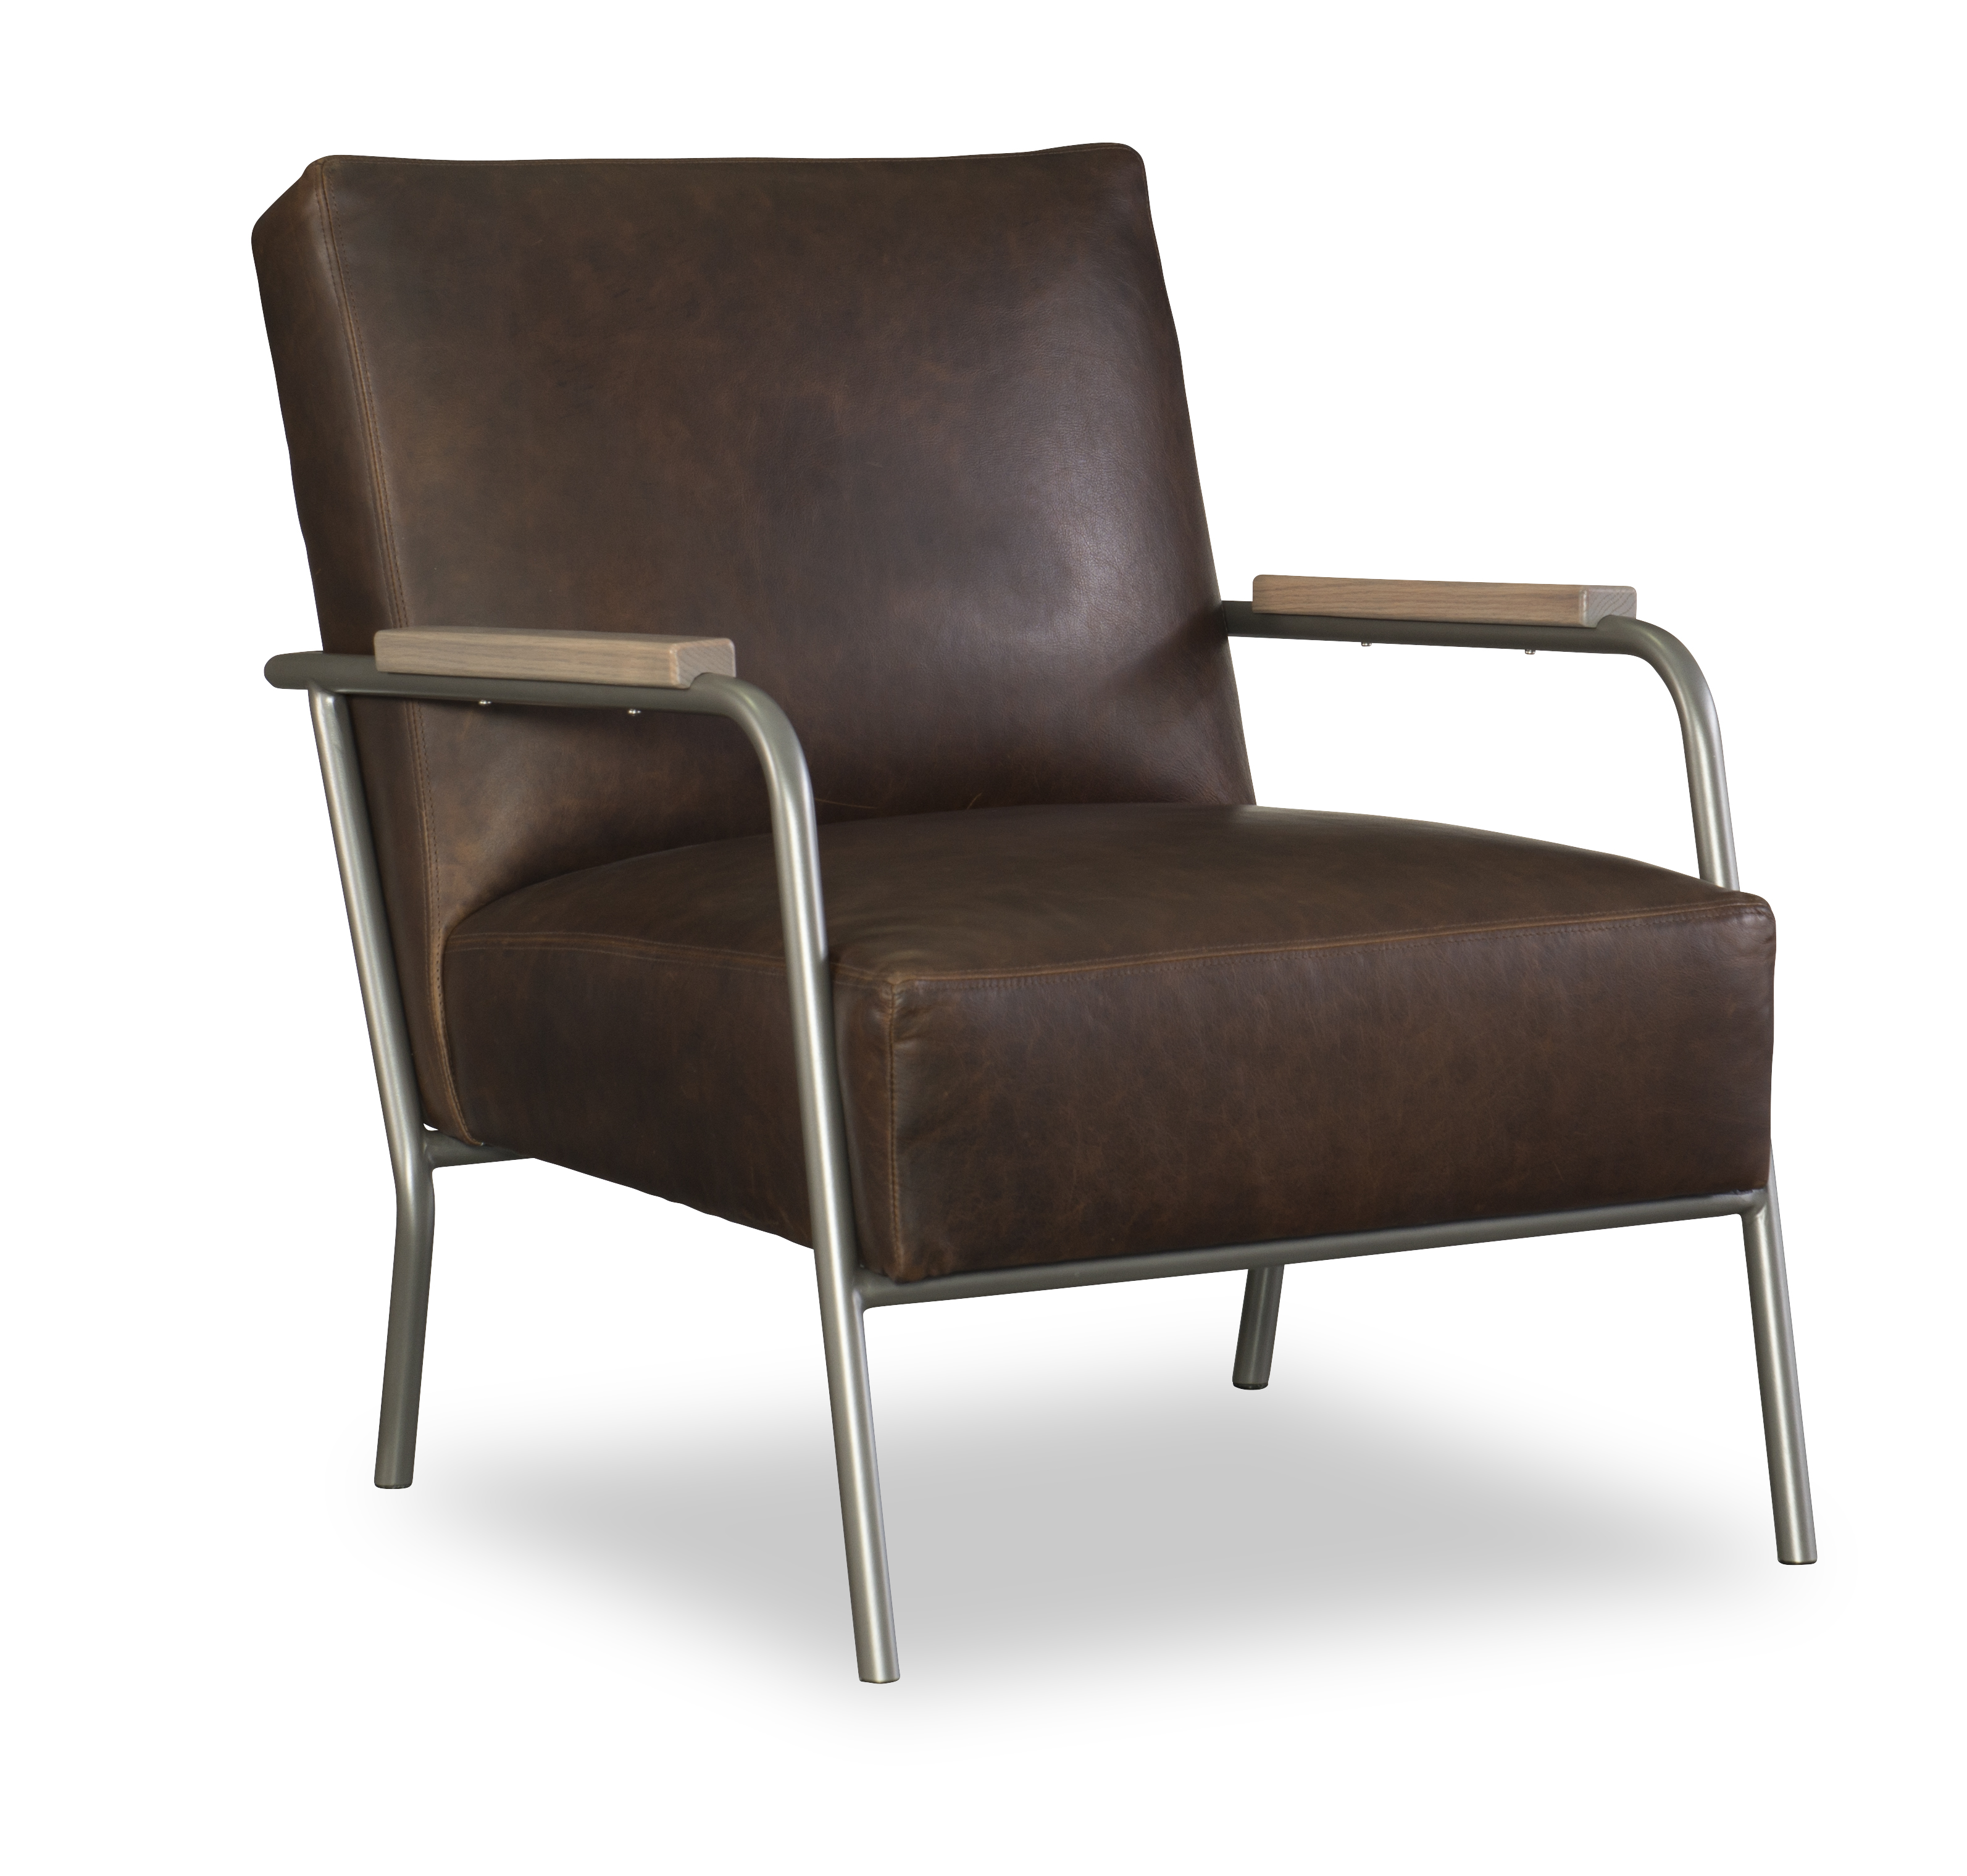 Levi chair upholstered in Arizona Rustic leather from CR Laine